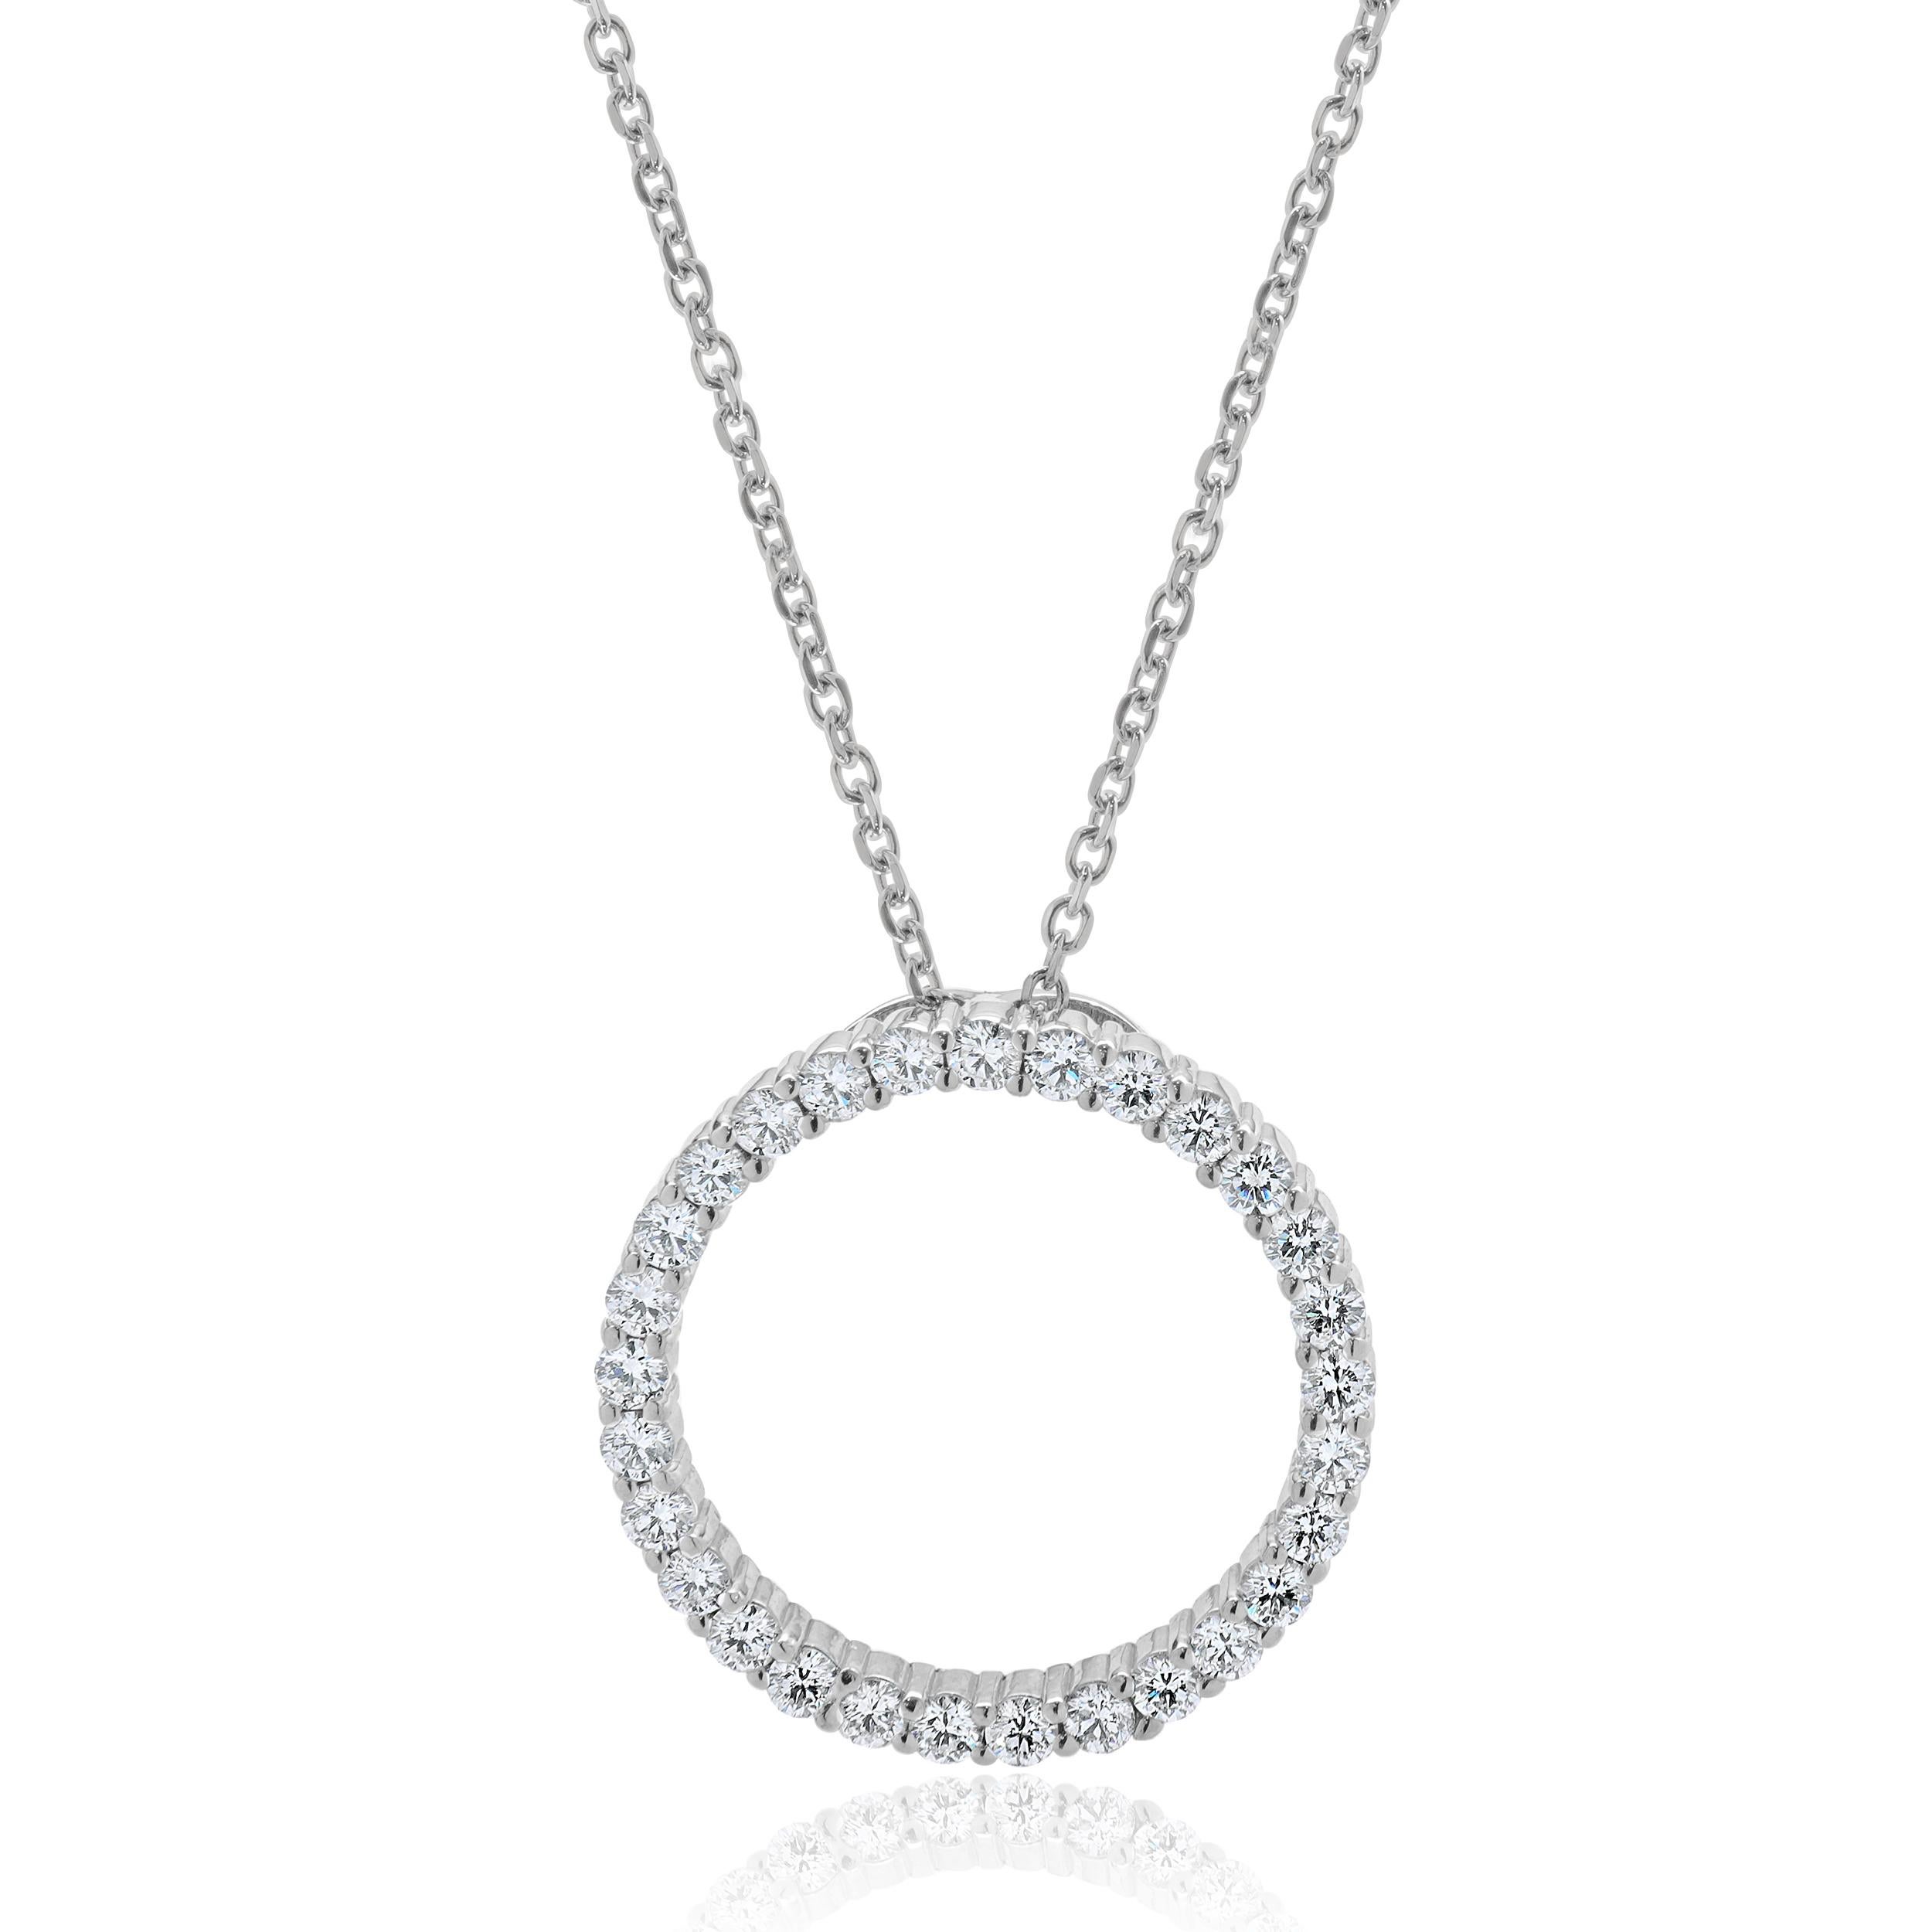 Designer: custom
Material: 14K white gold
Diamonds: 29 round brilliant cut = 1.16cttw
Color: G
Clarity: SI1
Dimensions: necklace measures 18-inches in length
Weight: 7.28 grams
